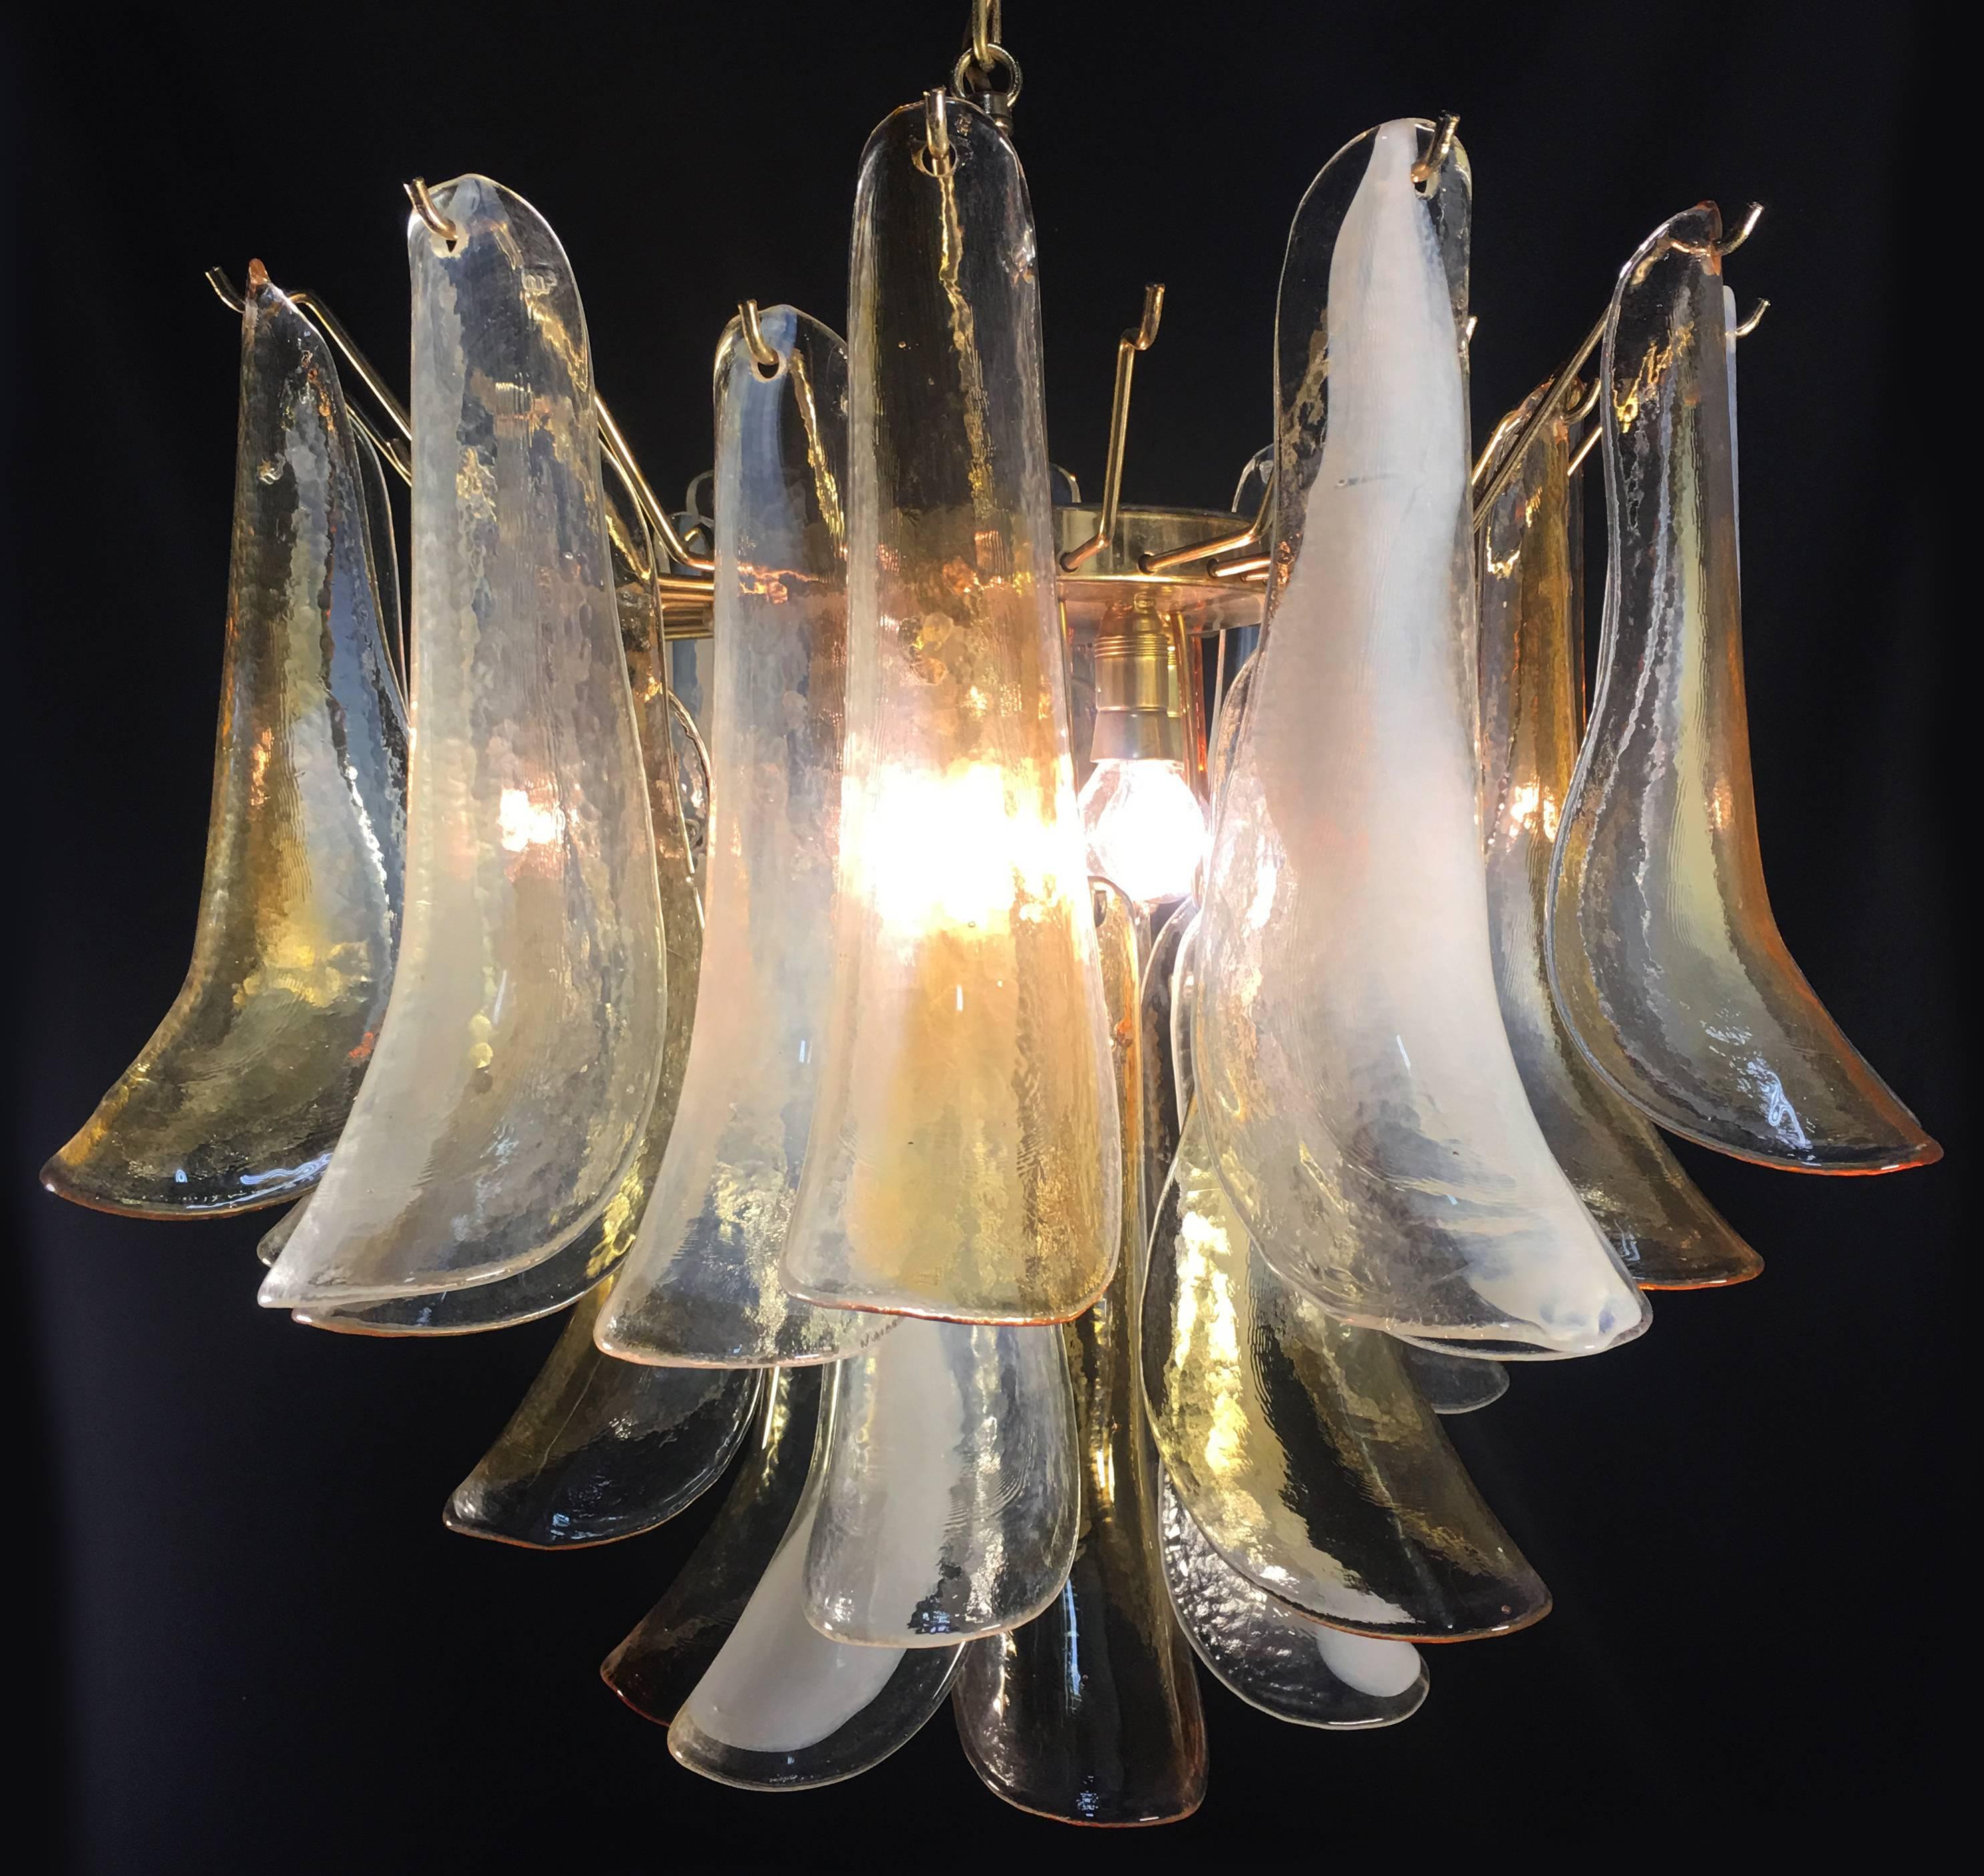 Elegant Pair of Chandeliers White and Amber Petals, Murano, 1990s For Sale 6